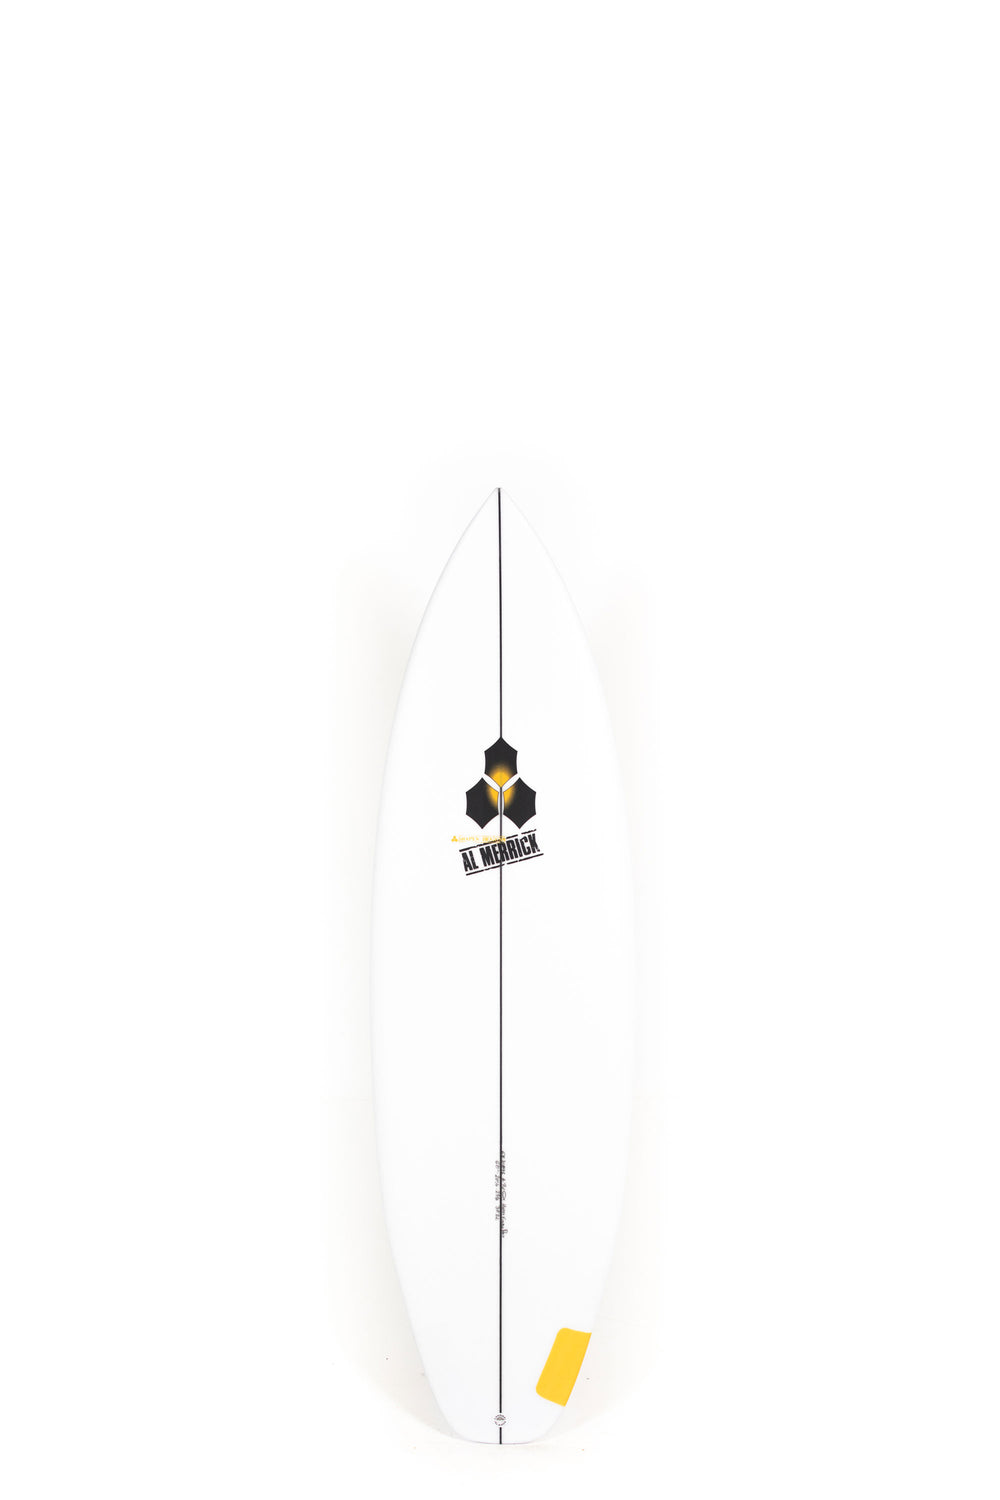 Pukas-Surf-Shop-Channel-Island-Surfboards-Happy-Every-Day-Al-Merrick-6_0